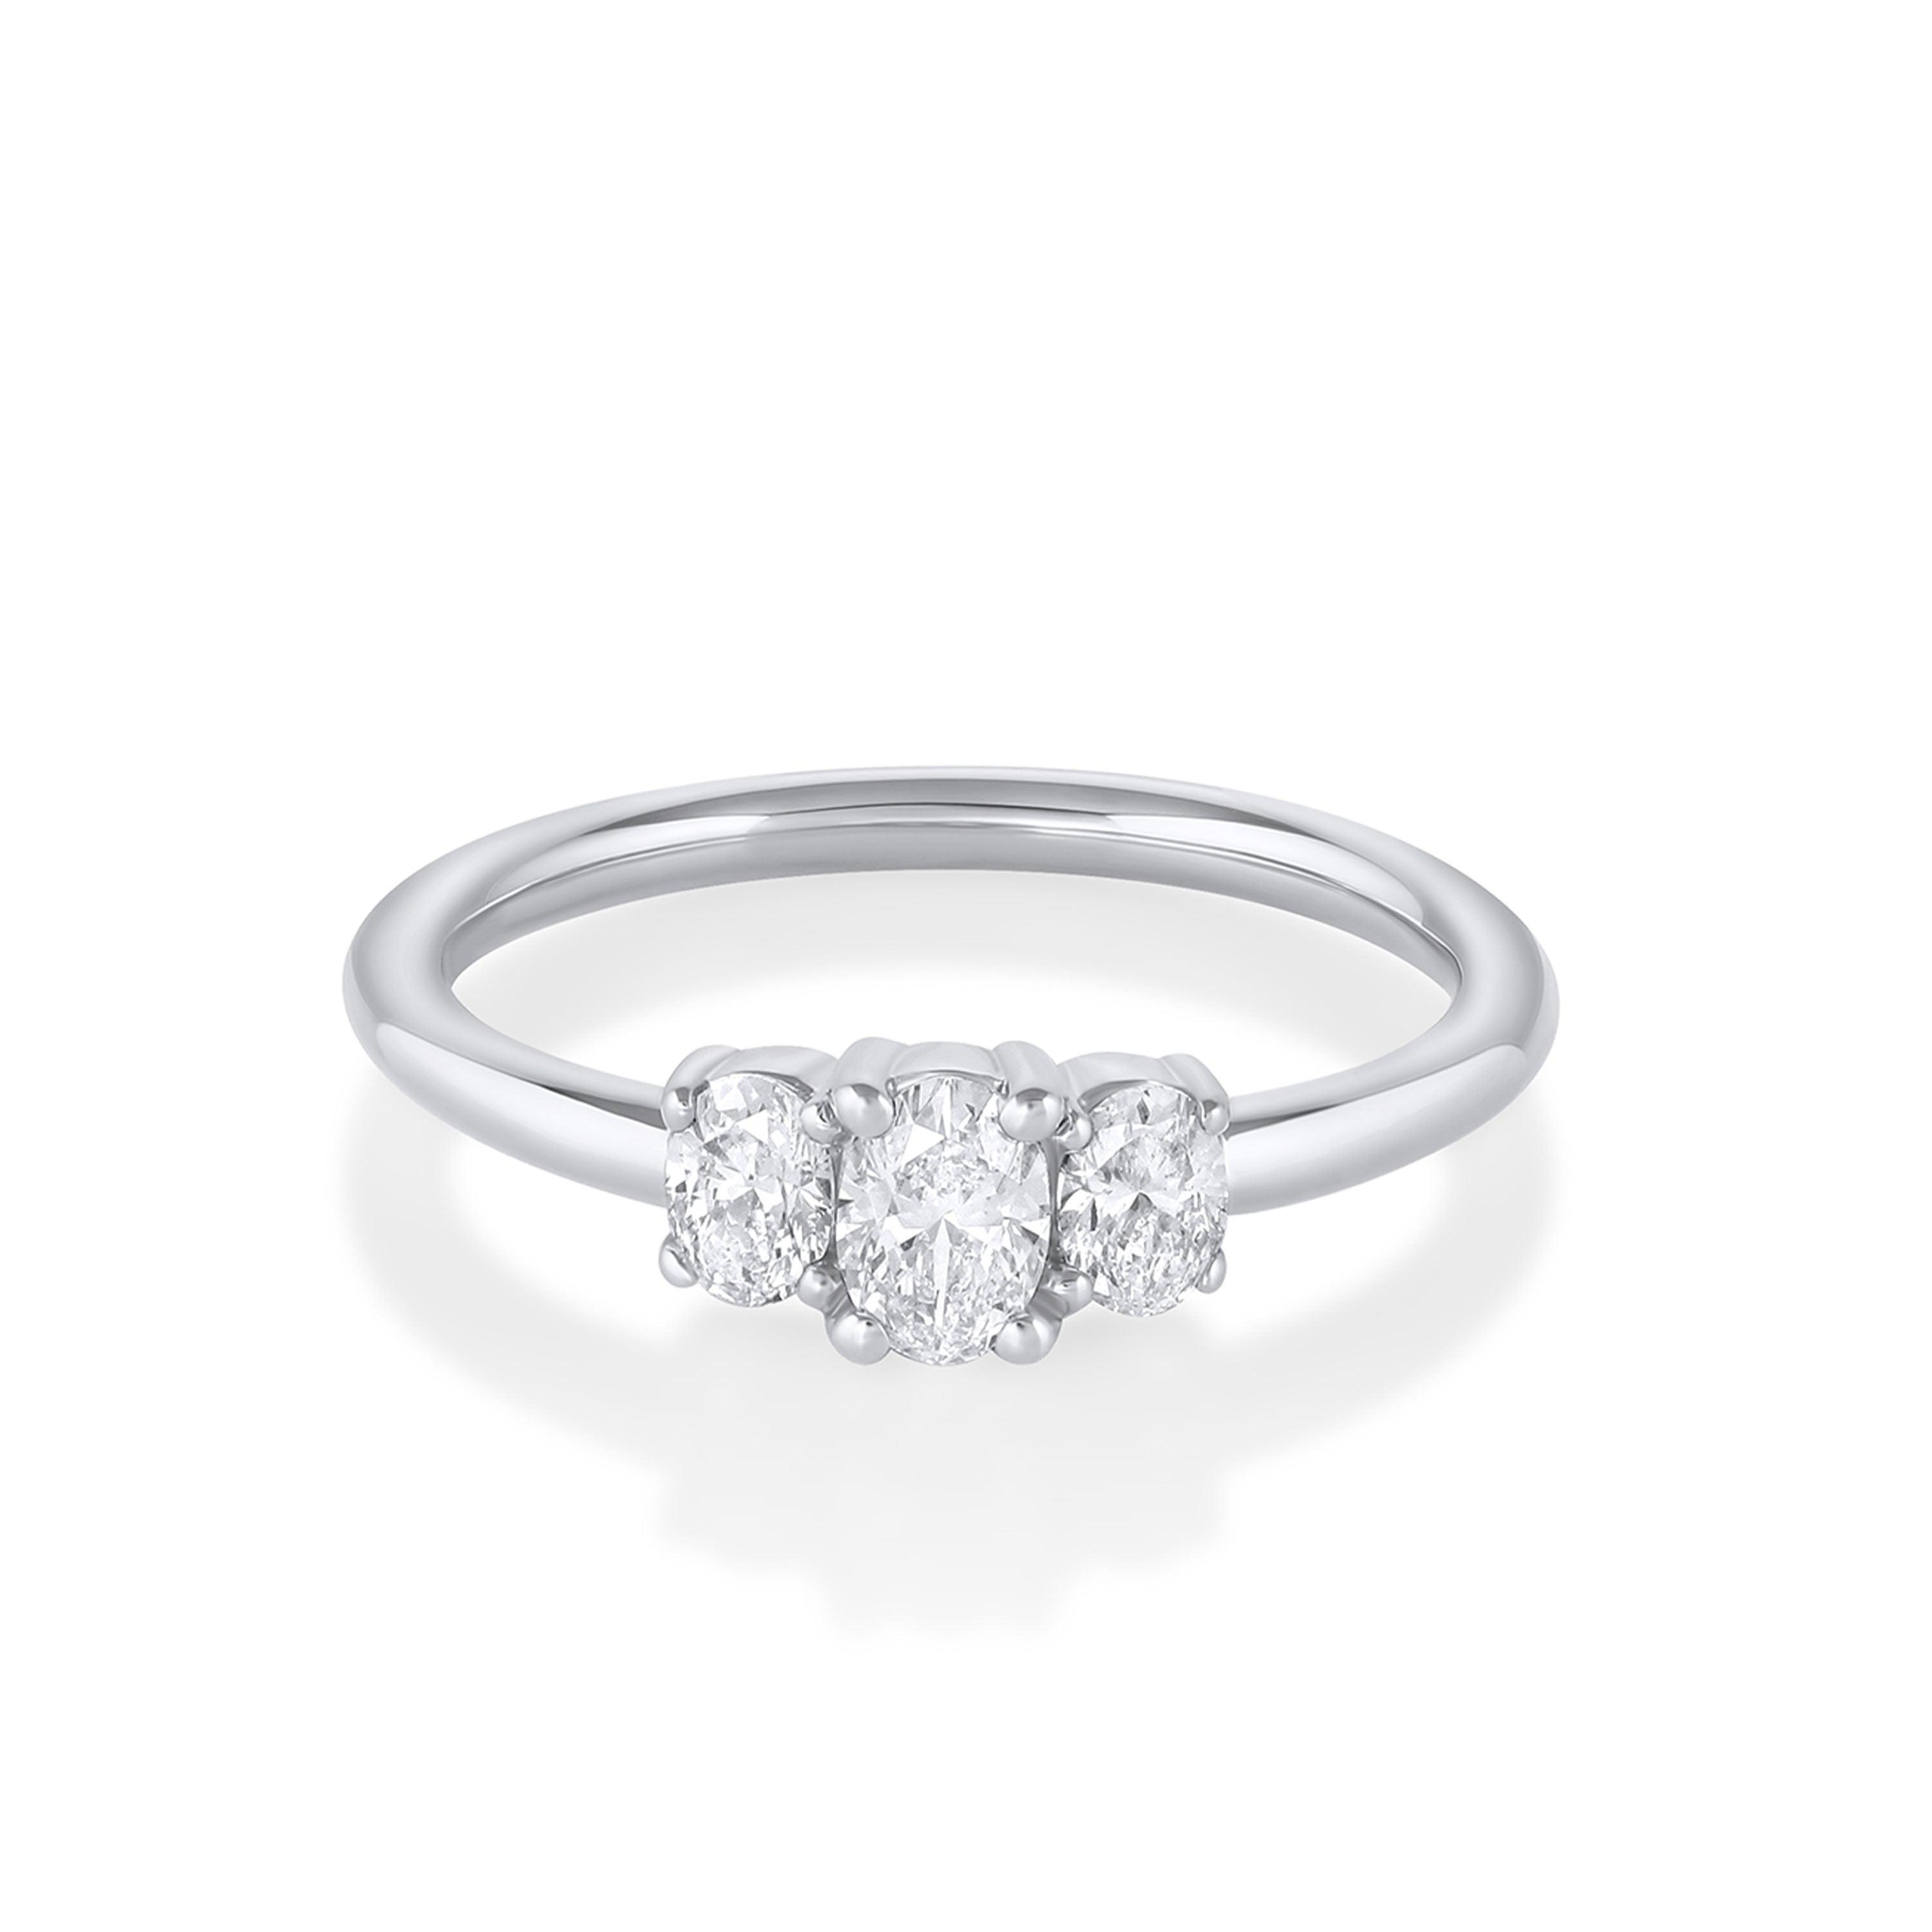 Marrow Fine Jewelry Minuette Collection Michelle Oval Three-Stone White Diamond Engagement Ring